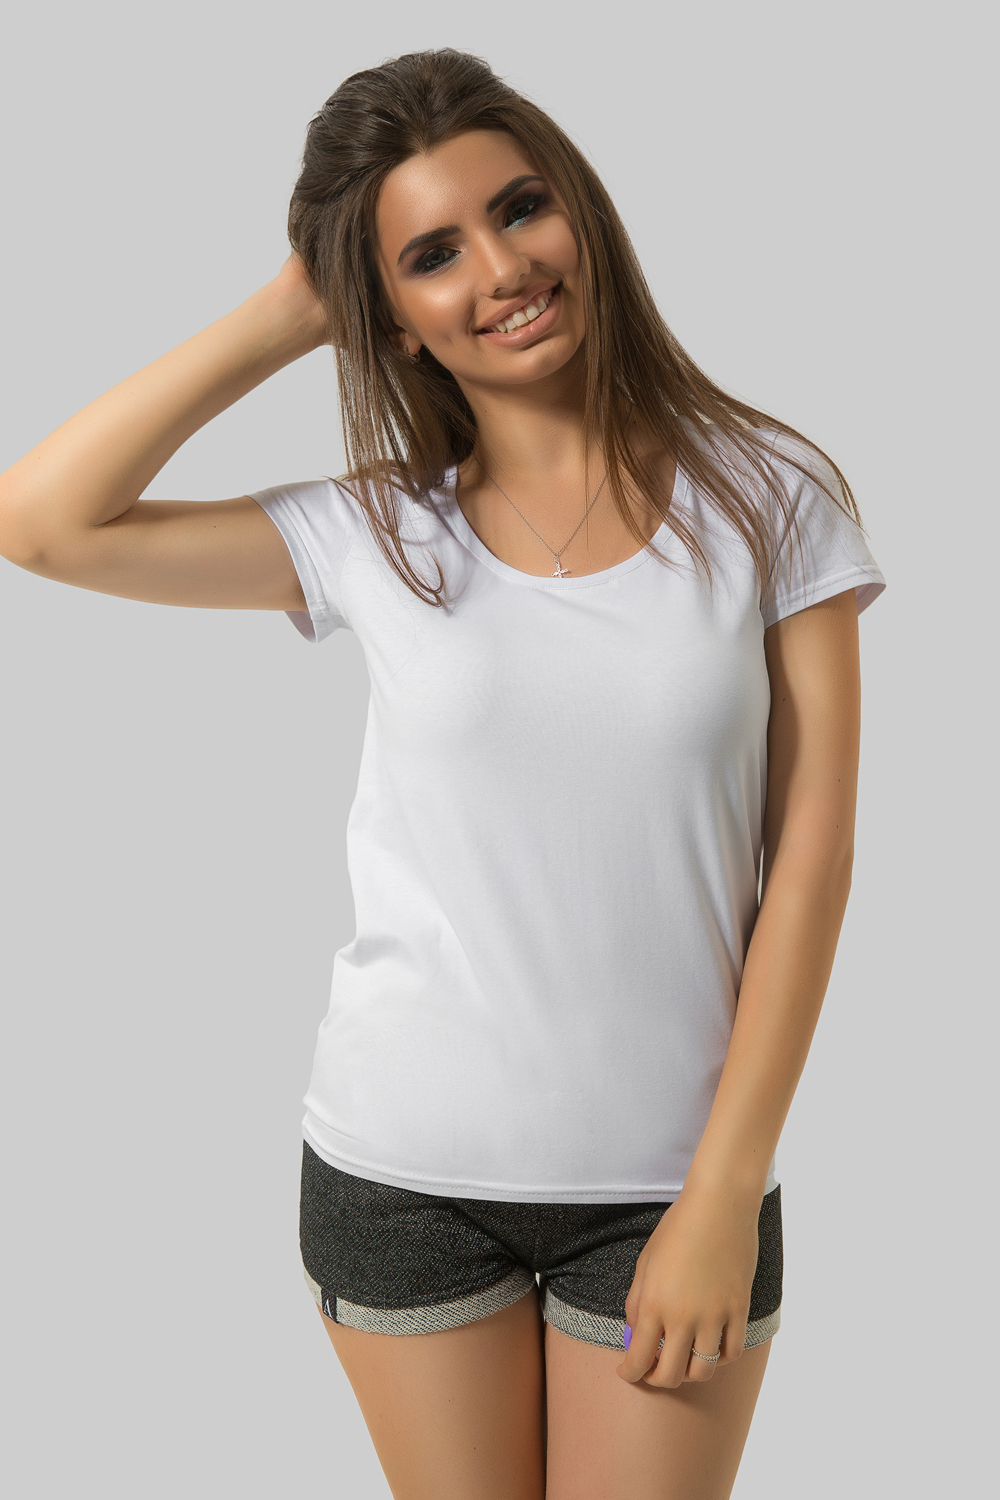 Cotton T-shirt with mesh inserts on the back in white